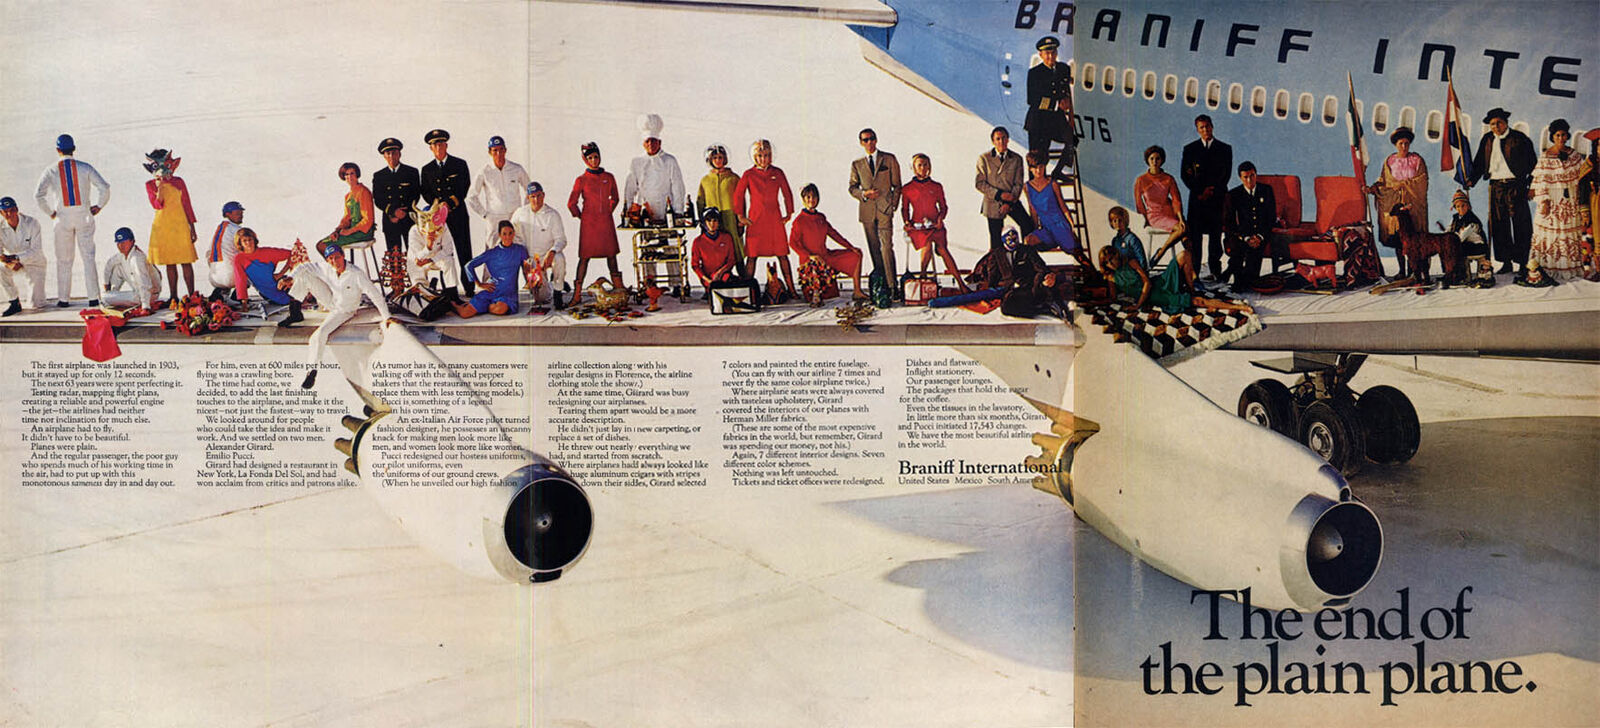 The end of the Plain Plane: Braniff Airlines ad 1965 L